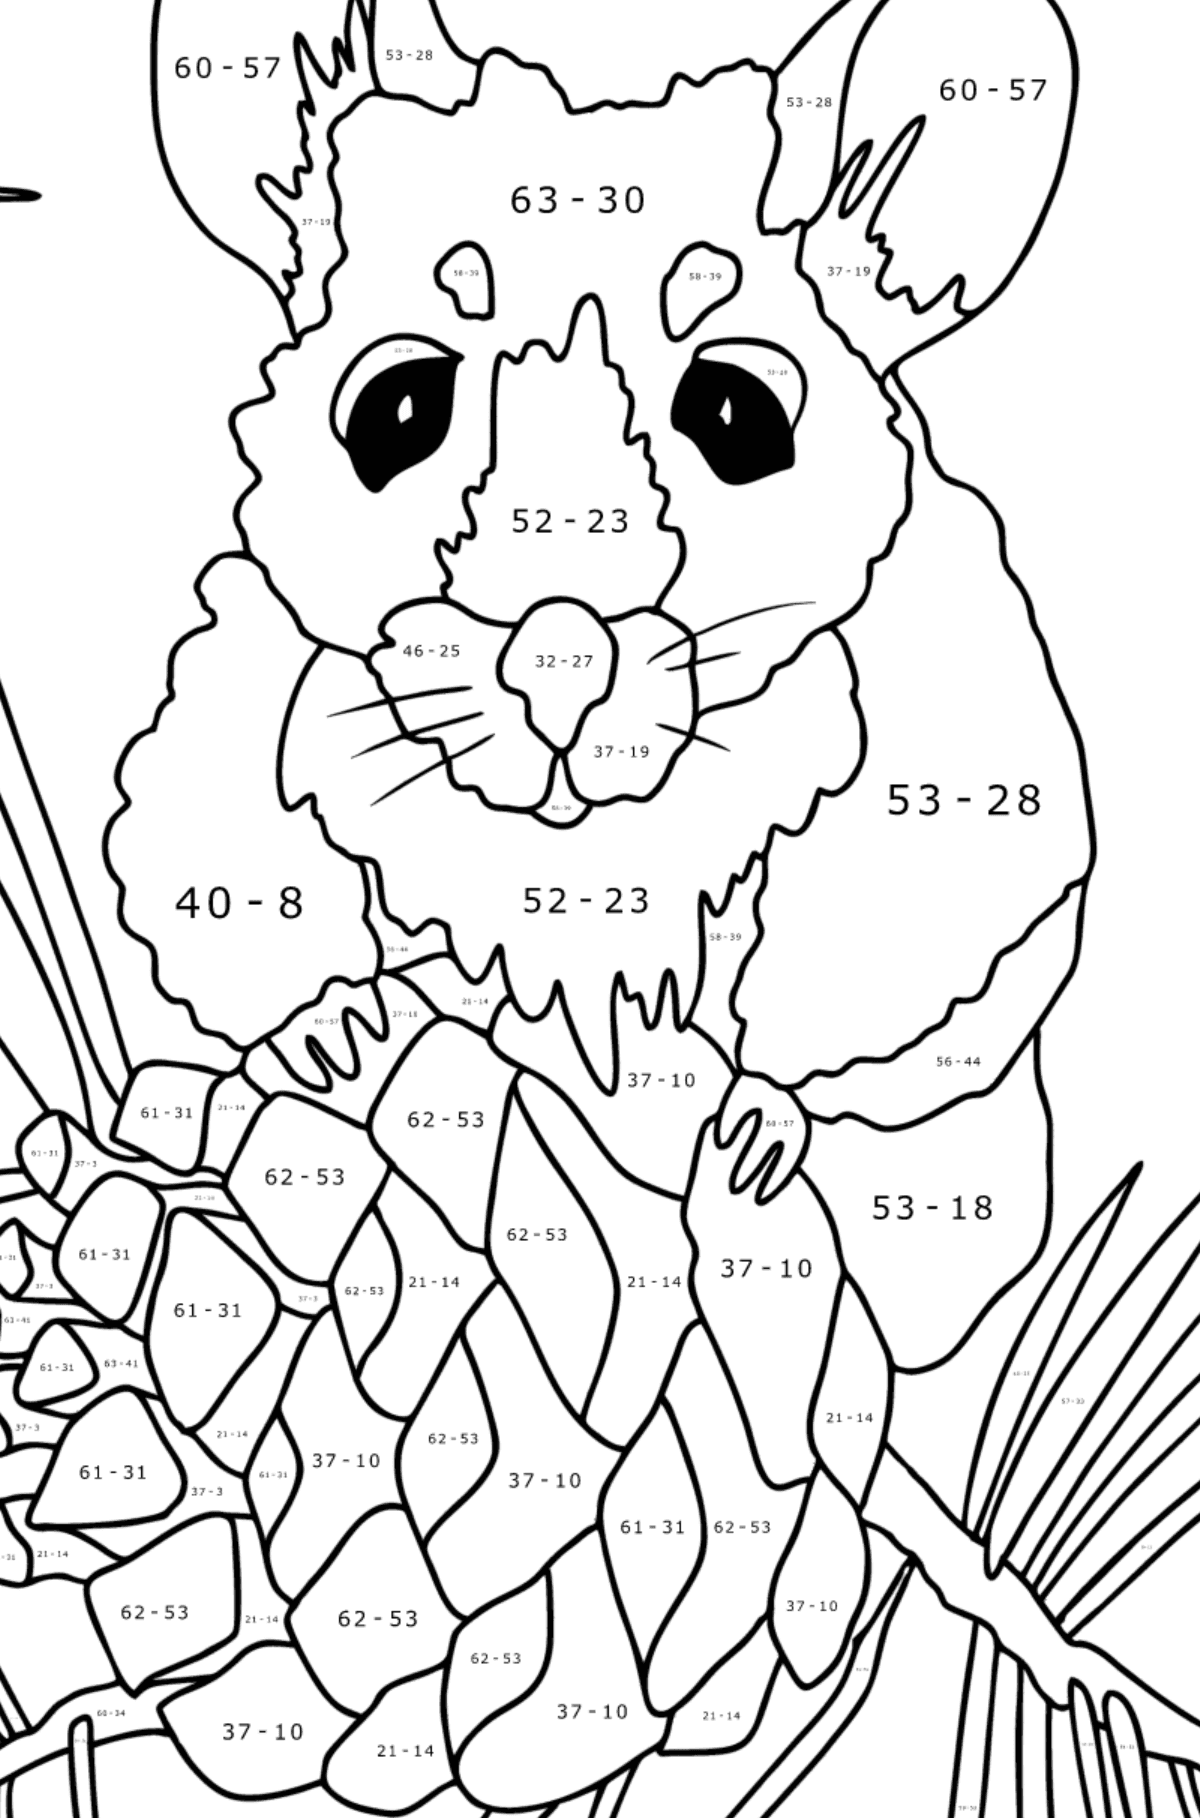 Cute little mouse - Mice coloring pages for Adults online